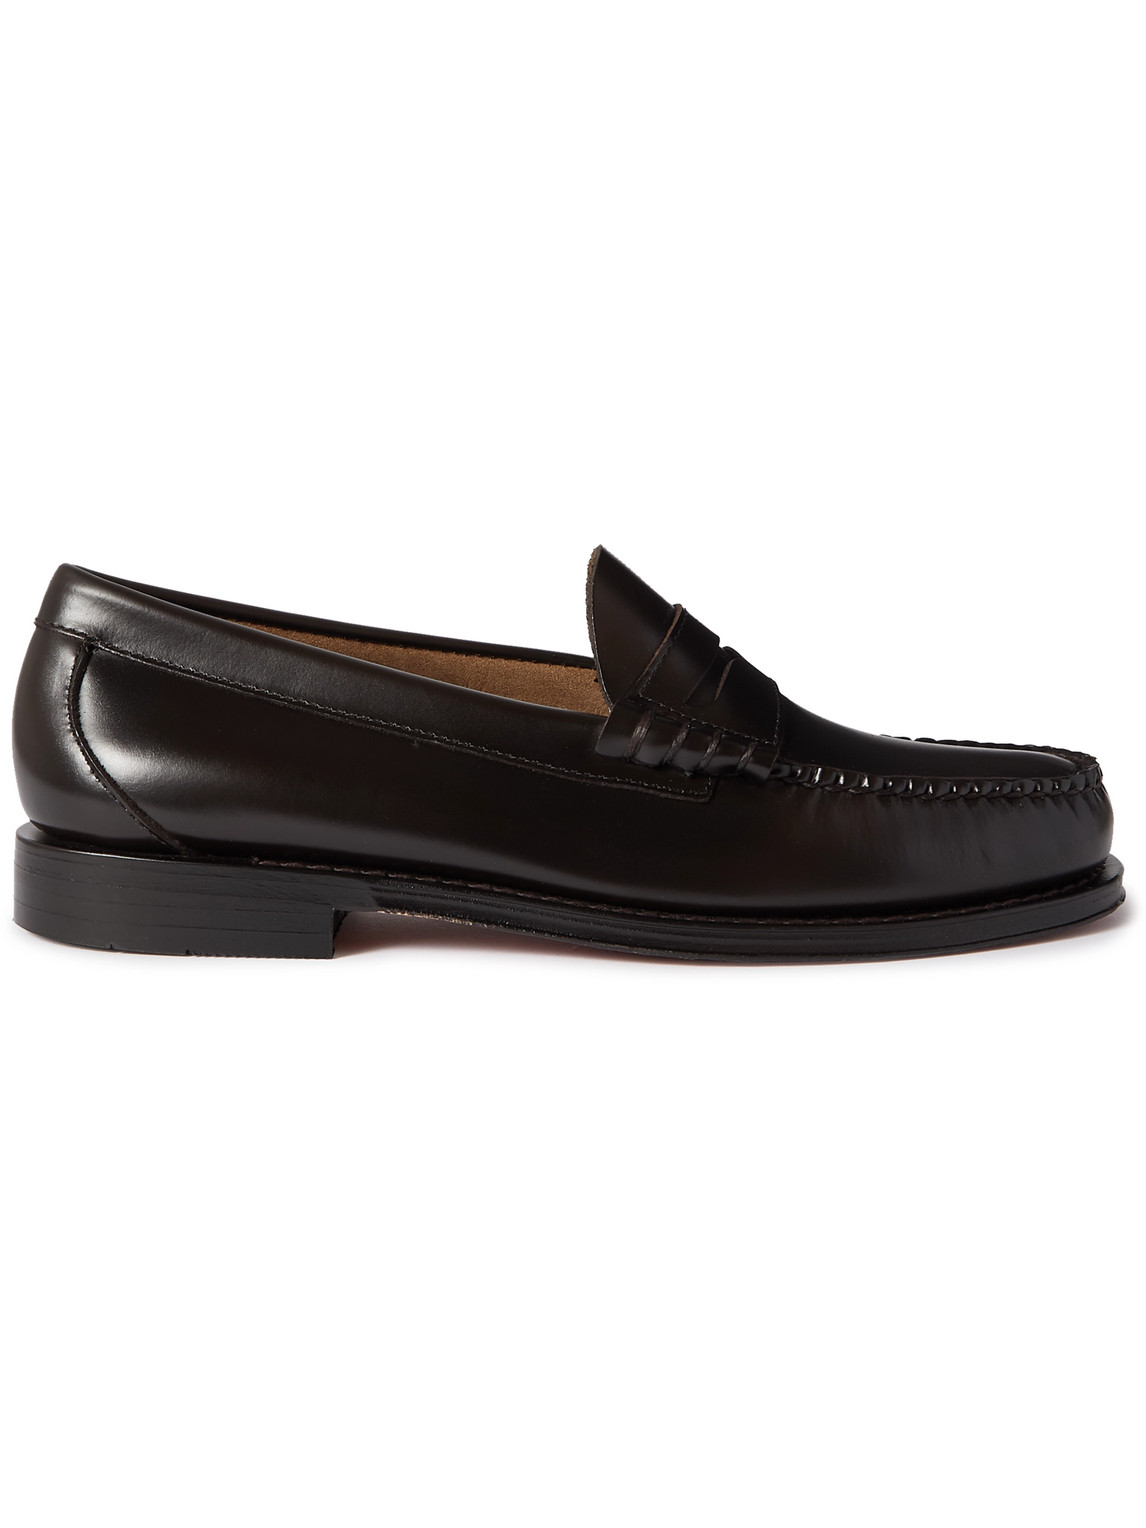 G.H. Bass & Co. - Weejuns Heritage Larson Leather Penny Loafers - Men - Brown - UK 8 von G.H. Bass & Co.